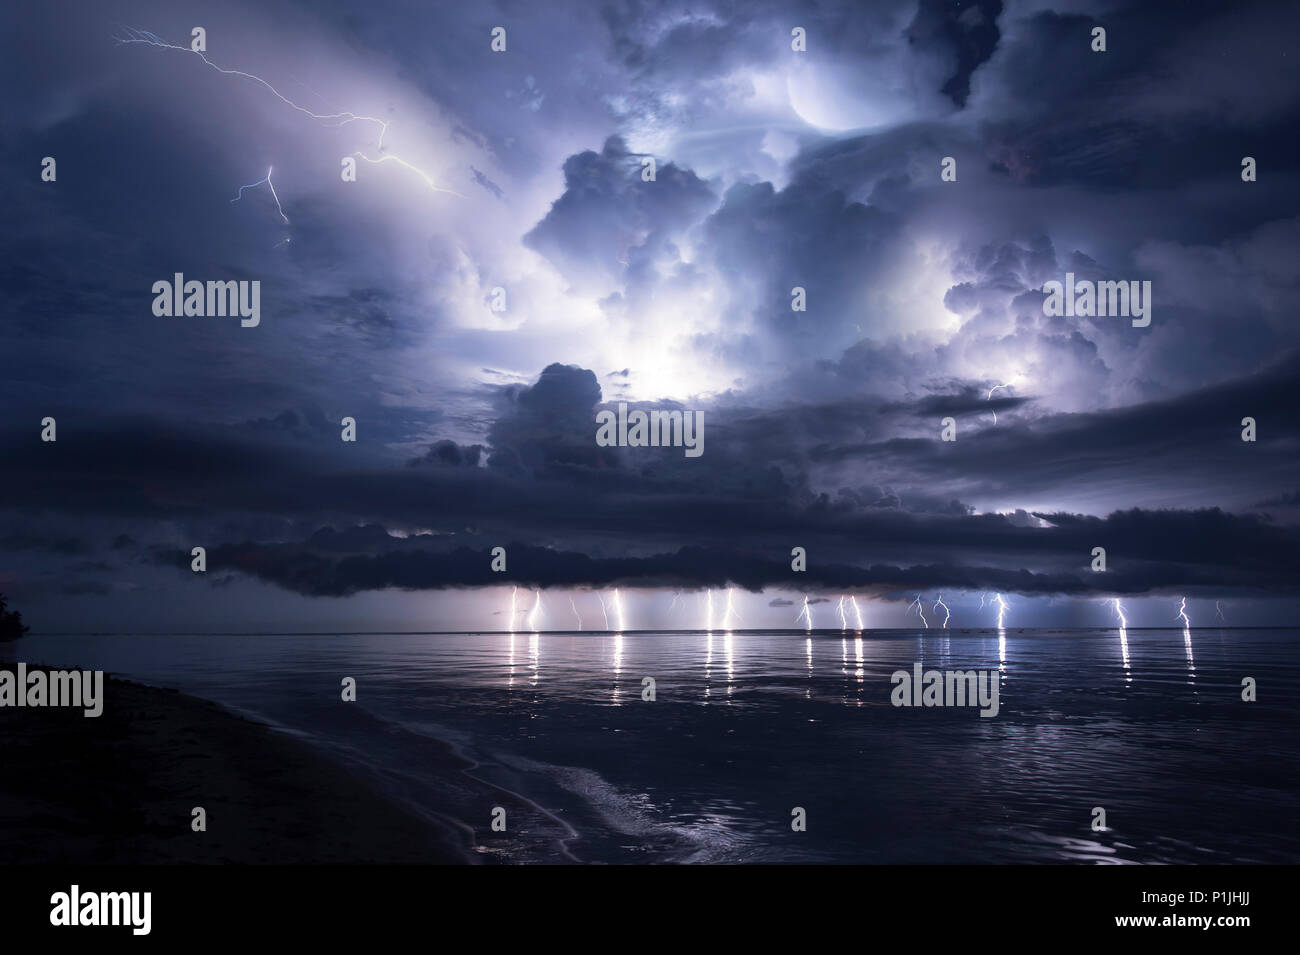 Lightshow of a thunderstorm with strong updrafts, ice caps and a developing shelf cloud above the lake Maracaibo (Catatumbo thunderstorm, the place with the highest lightning density worldwide), Ologa, Zulia, Venezuela, South America Stock Photo